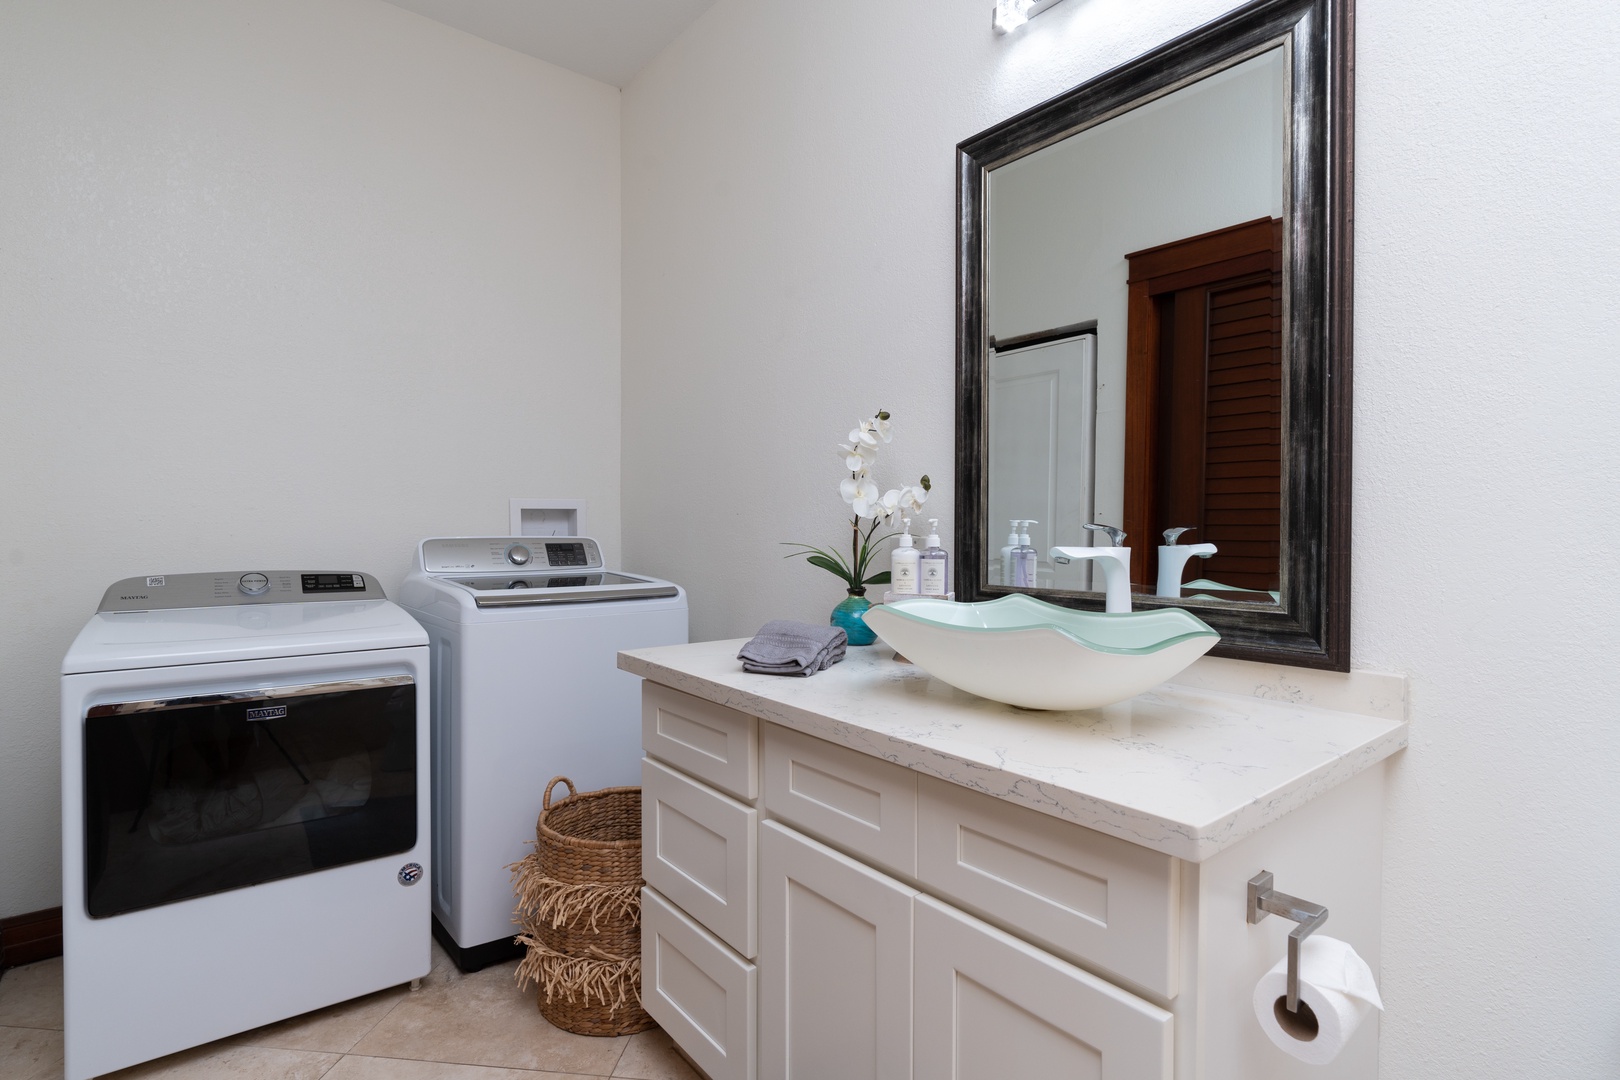 Honolulu Vacation Rentals, Wailupe Seaside - Shared bath with tub/shower combo and washer and dryer.